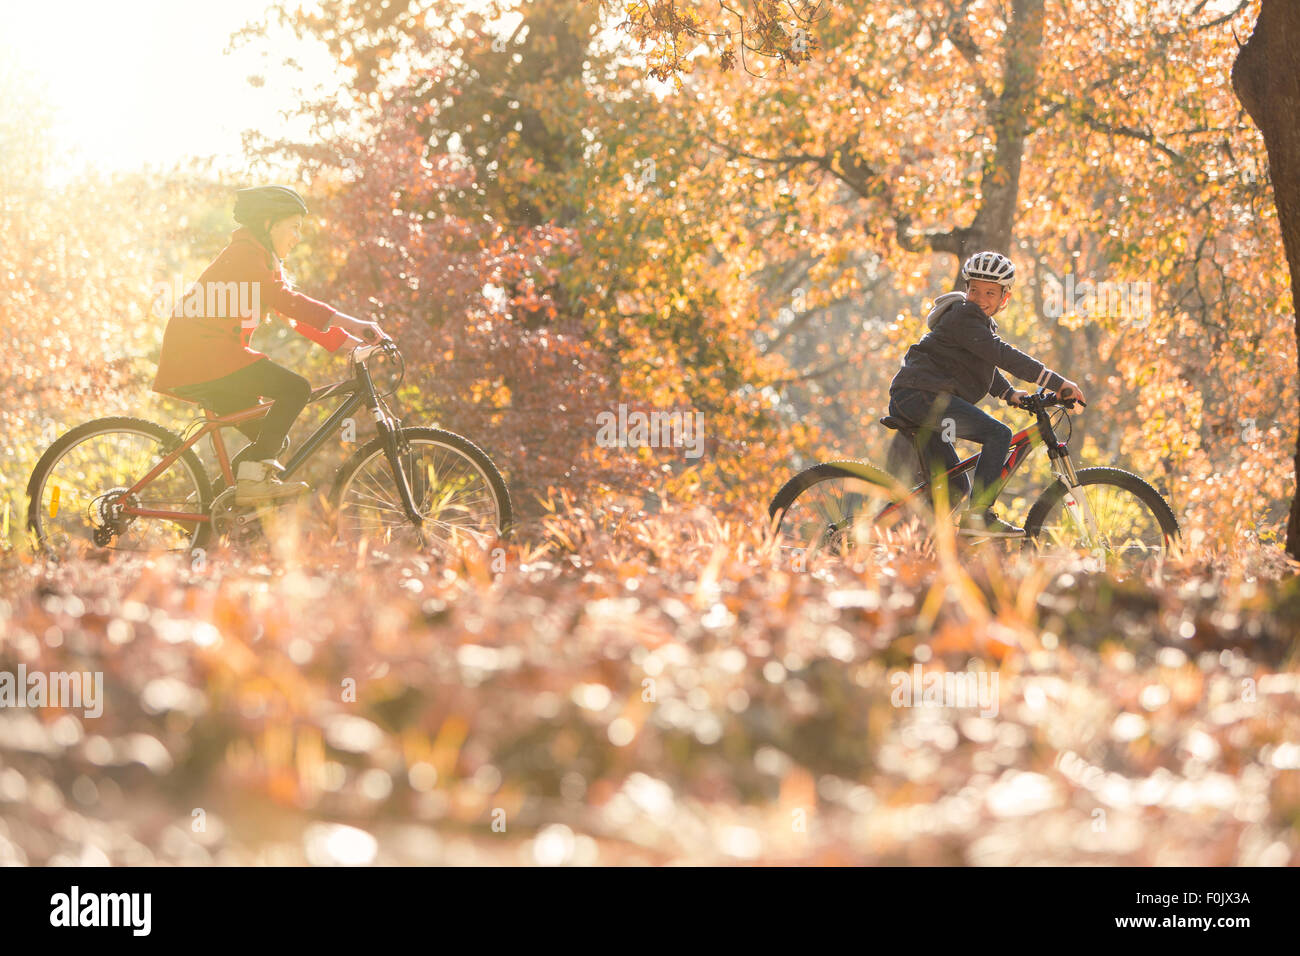 Boy and girl riding bikes in autumn leaves Stock Photo